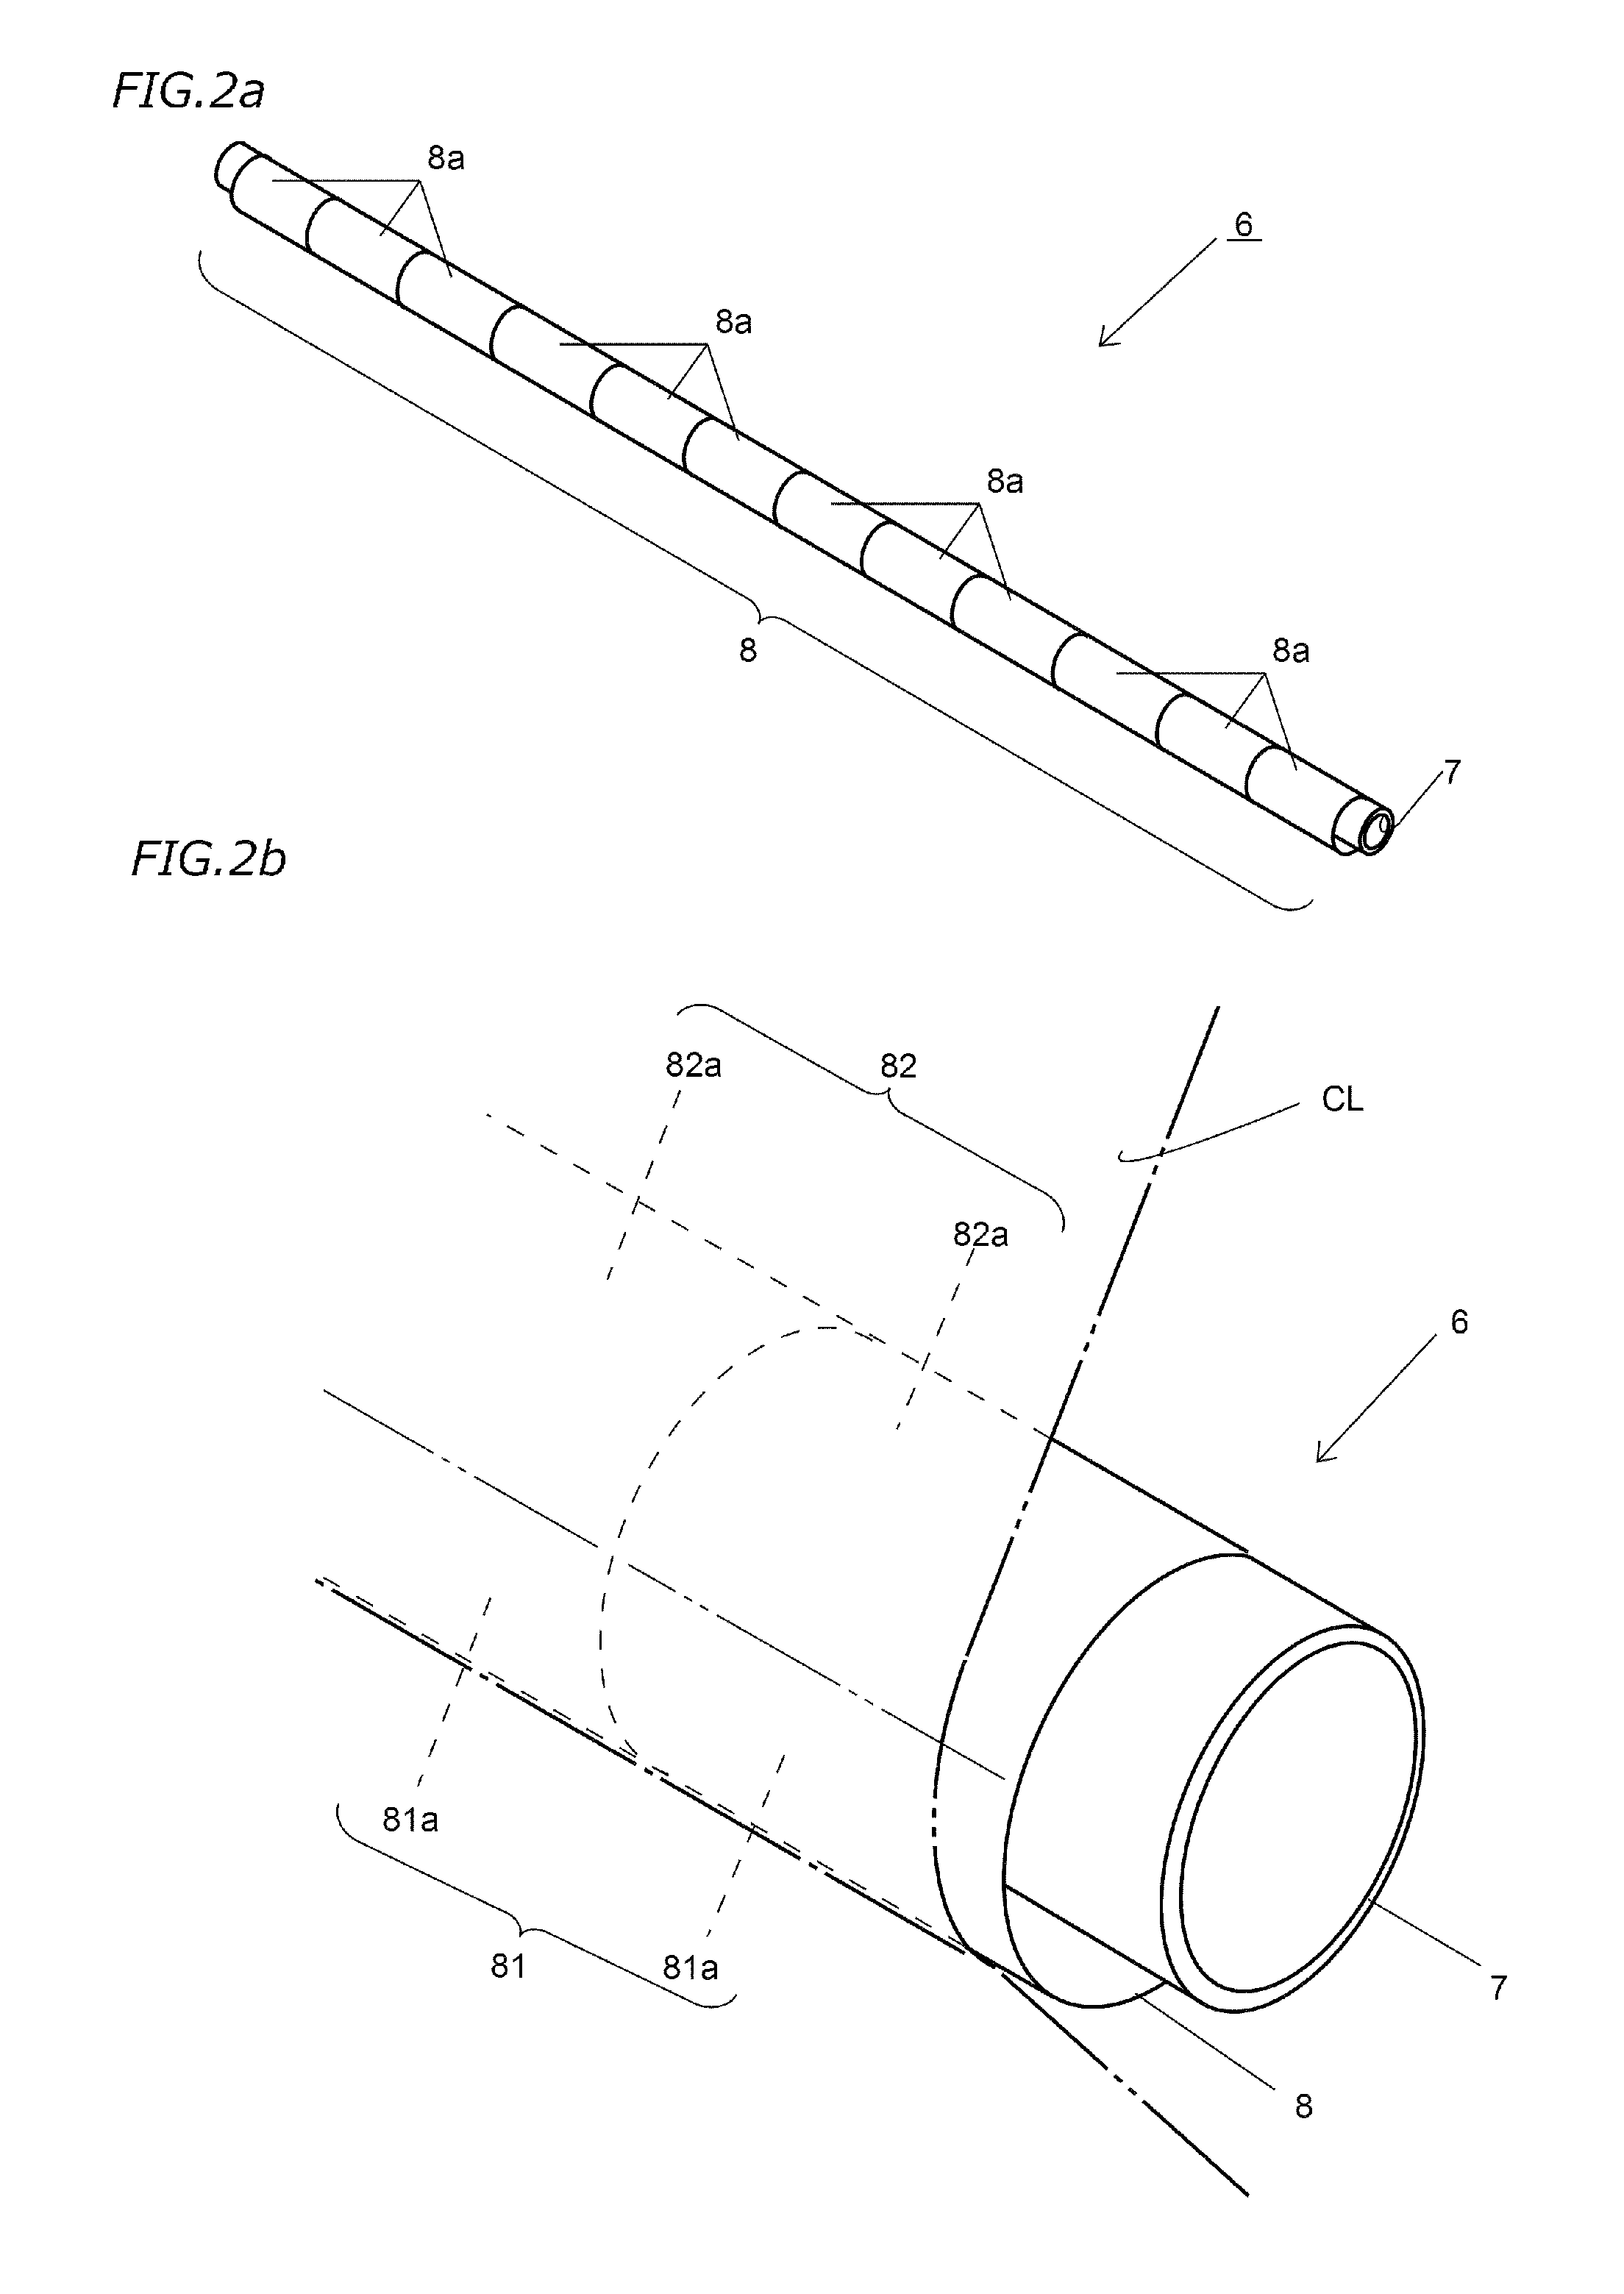 Tension fluctuation alleviating device for use in fabric printing apparatus